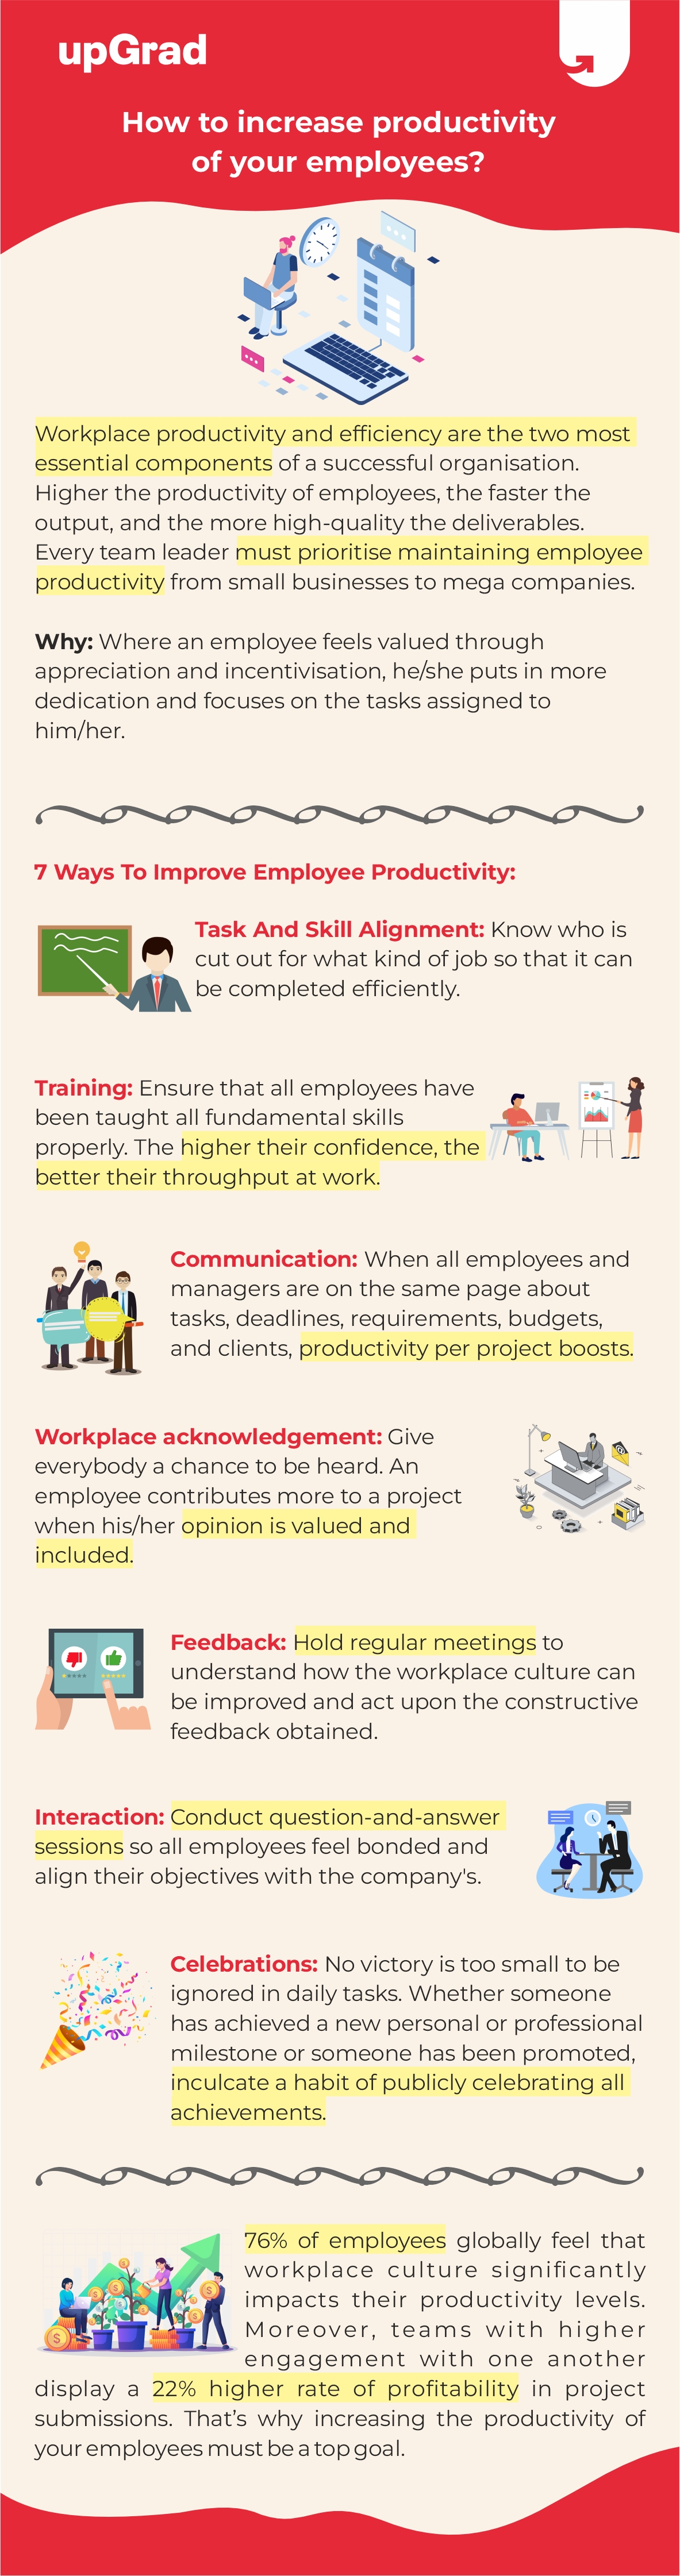 How To Increase The Productivity Of Your Employees?